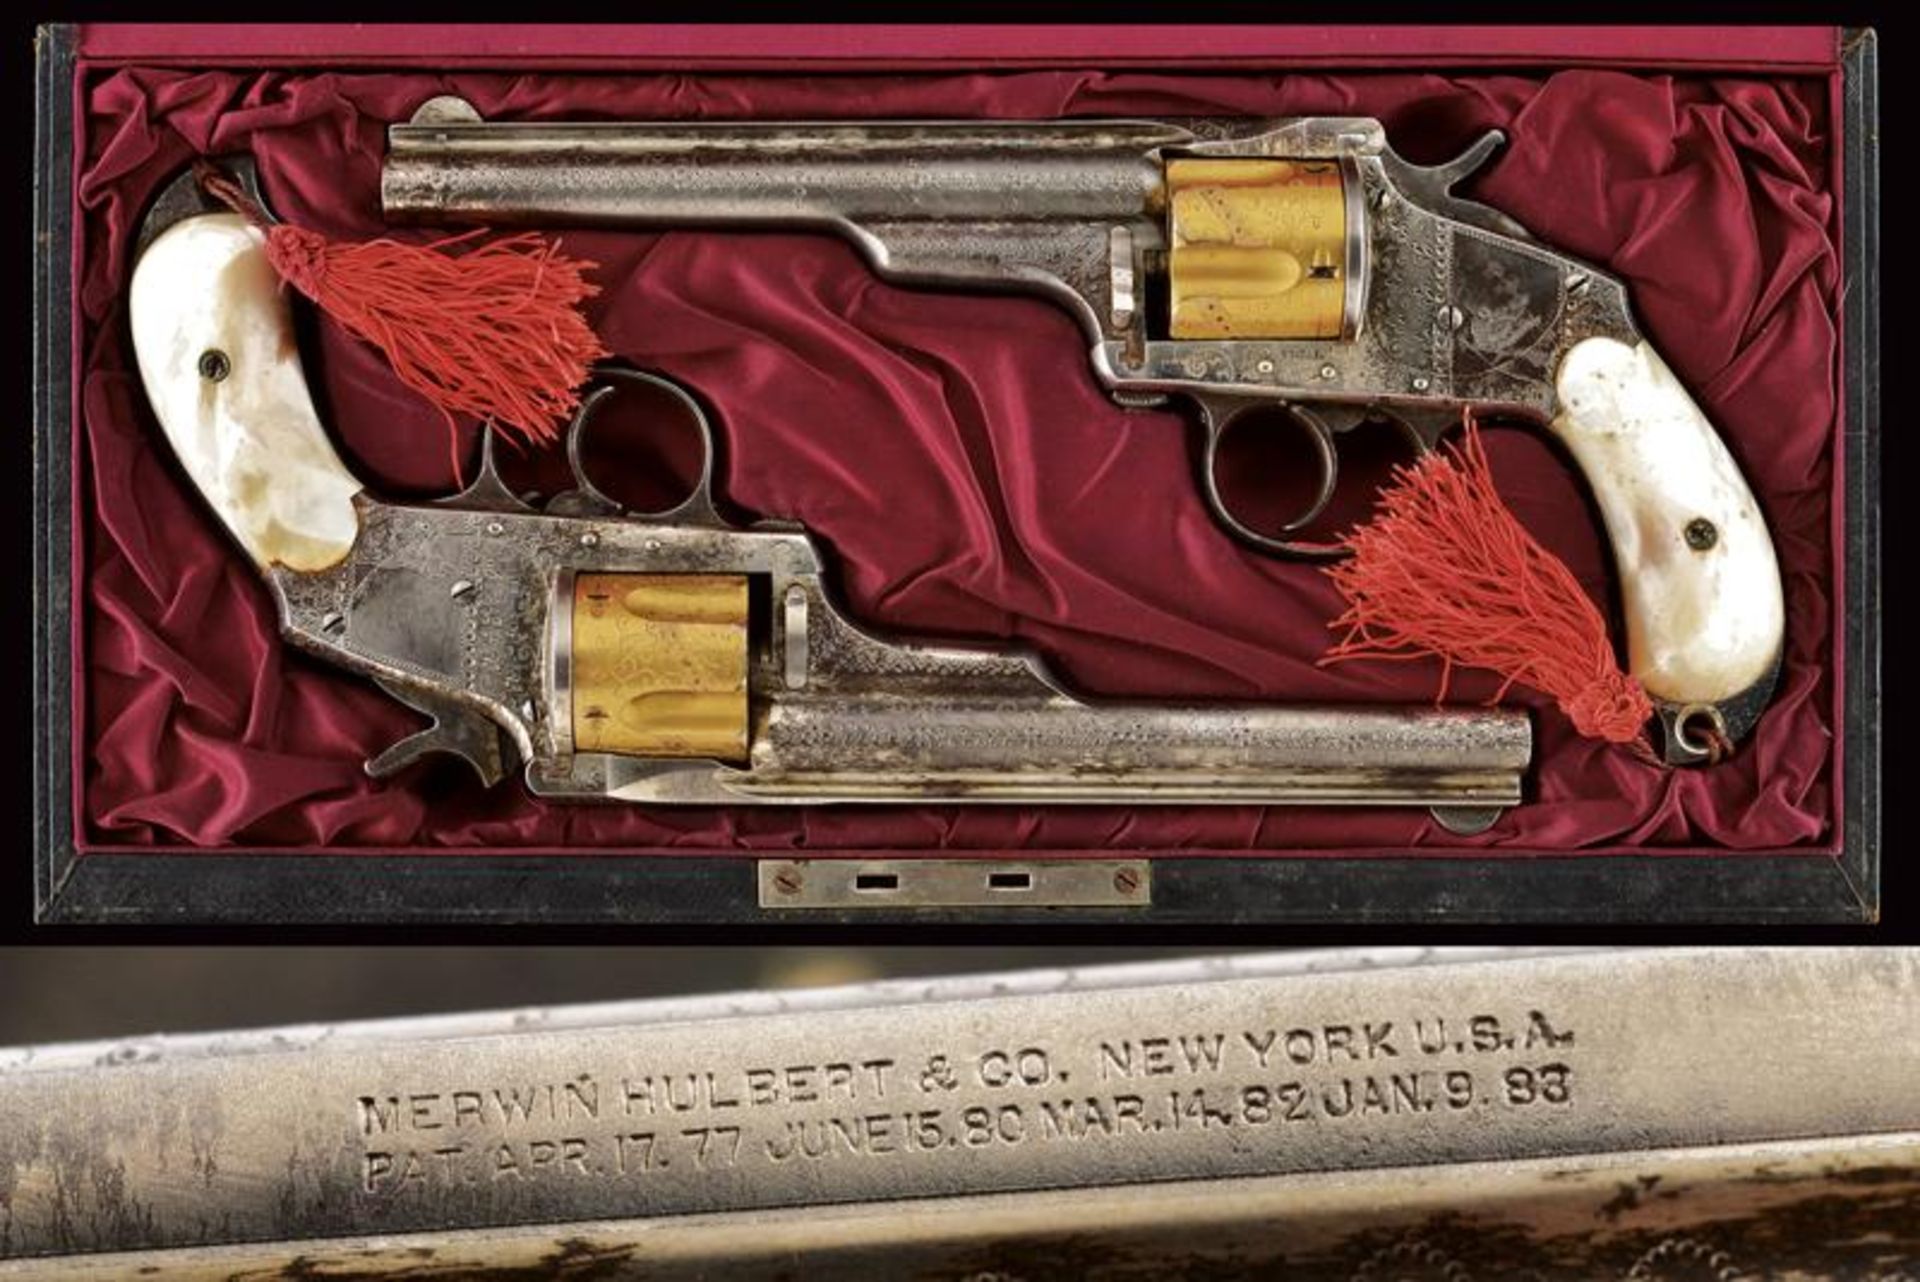 An interesting pair of engraved Merwin Hulbert & Co. D.A. Pocket Model Revolvers with case